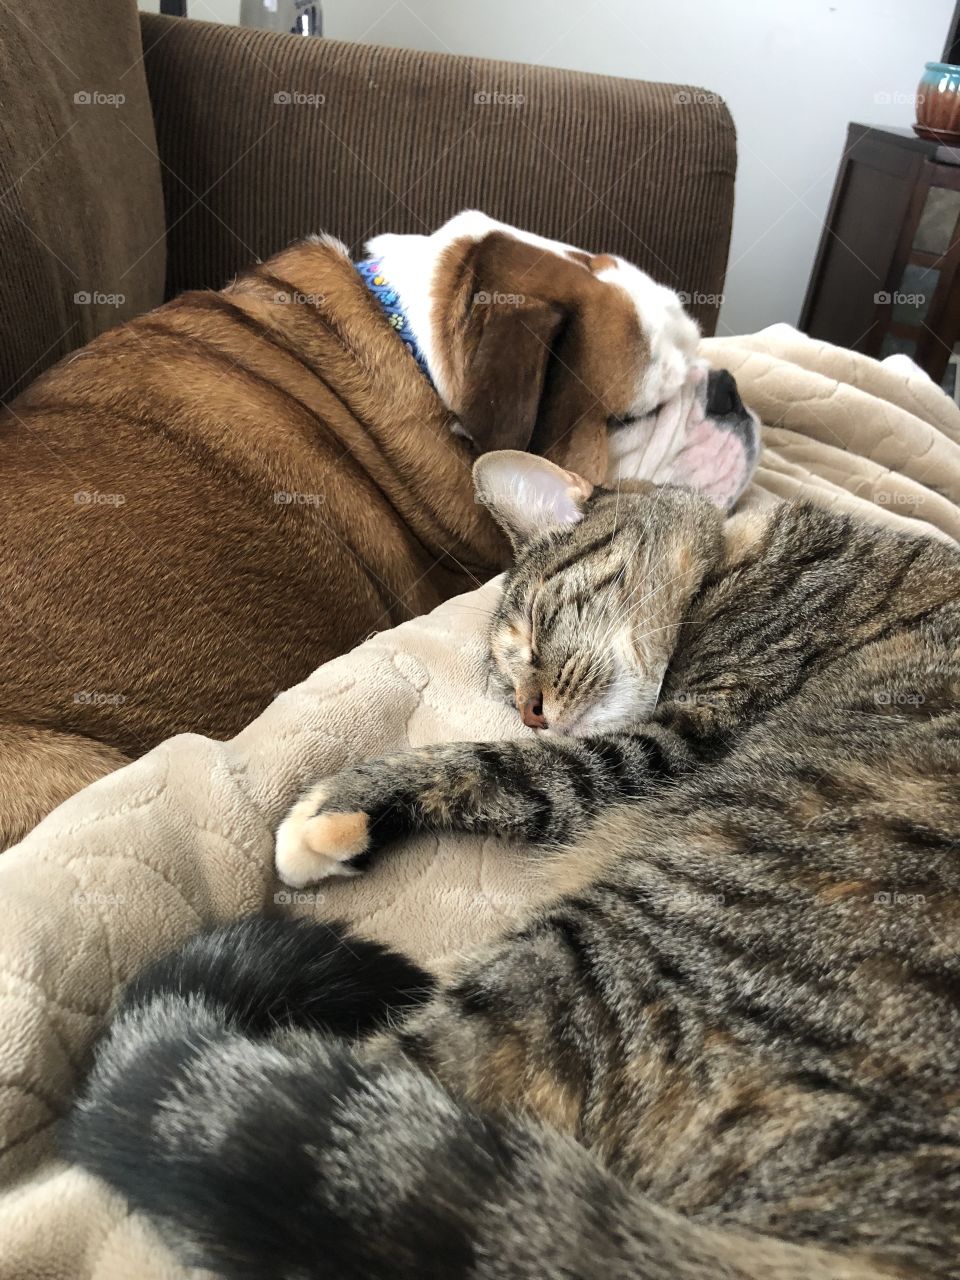 Bulldog and cat best buds napping buddies 